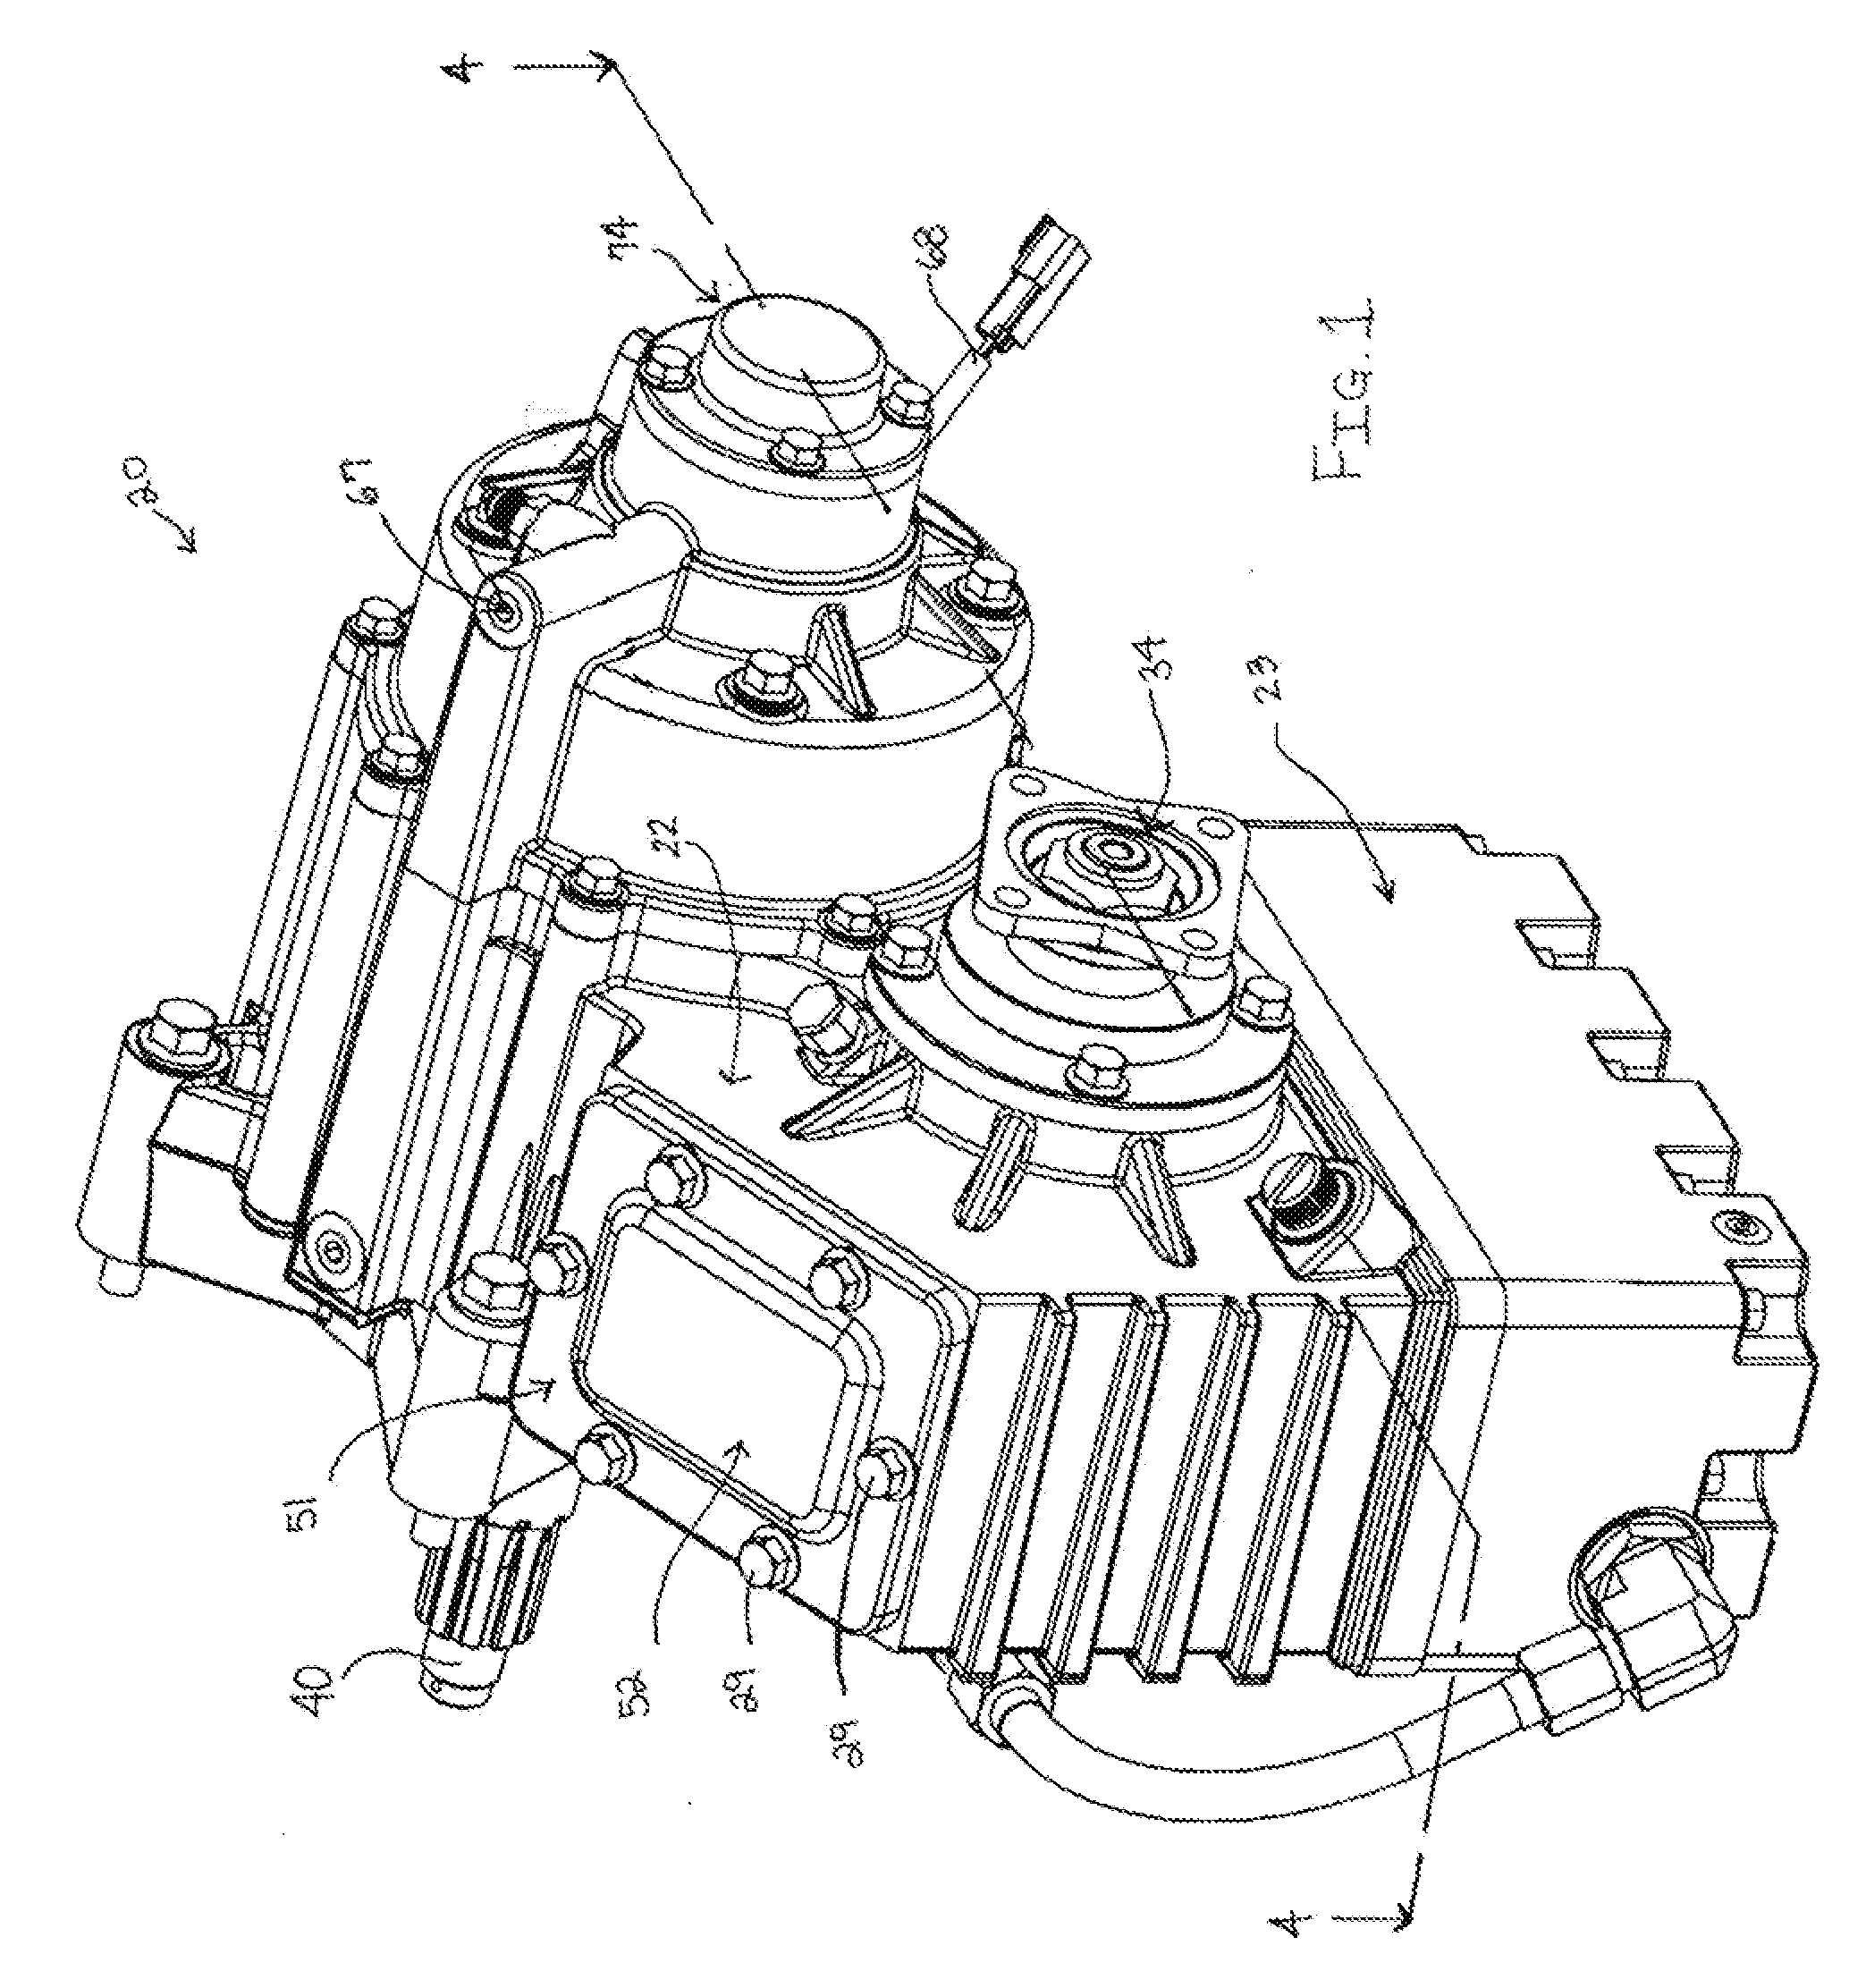 Pump transmission with pto gear and independently clutched impeller